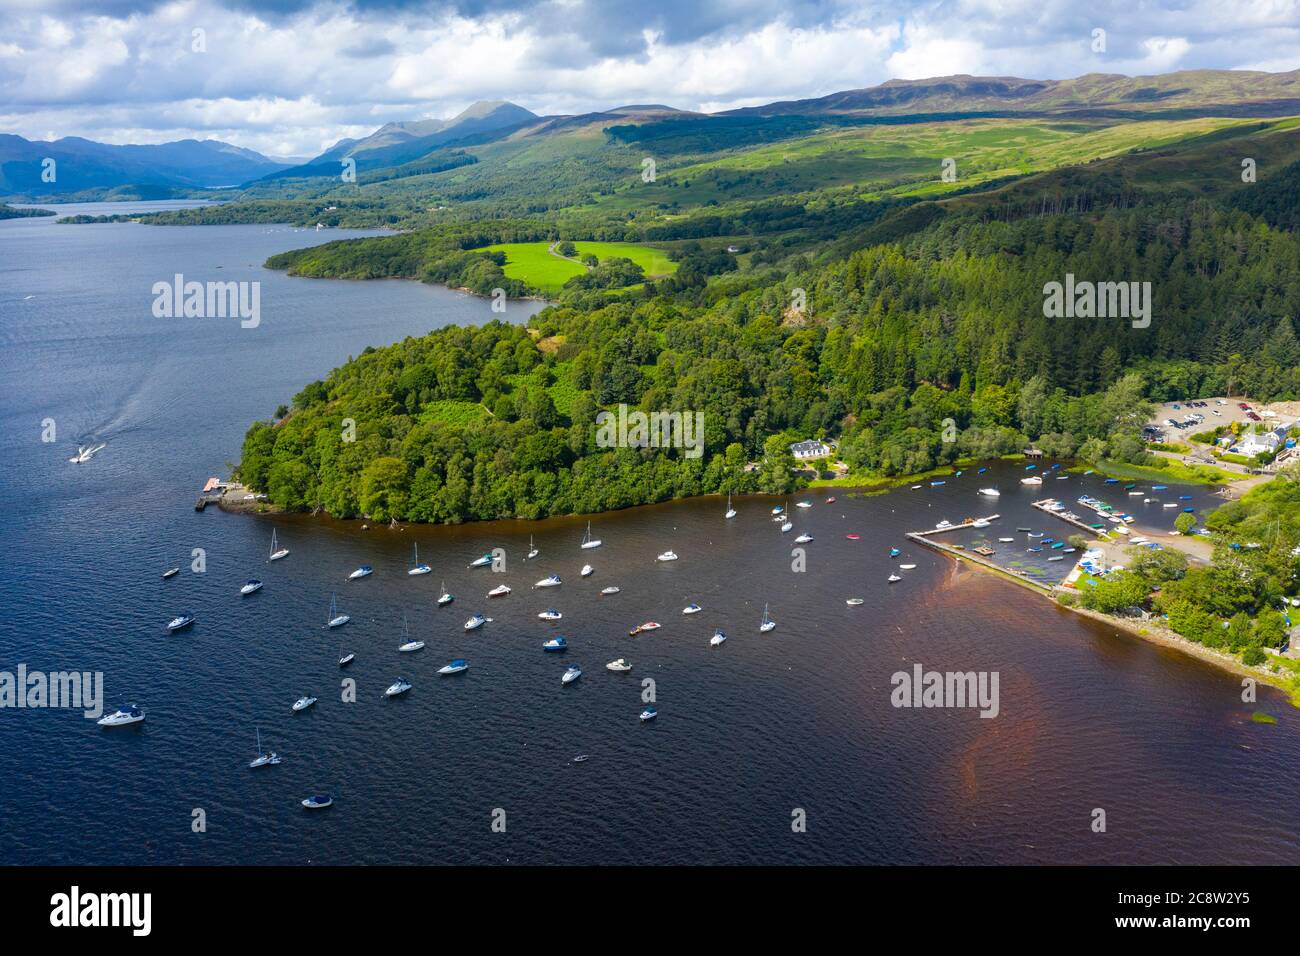 Aerial view of village of Balmaha on shores of Loch Lomond in Loch Lomond and The Trossachs National Park, Scotland, UK Stock Photo